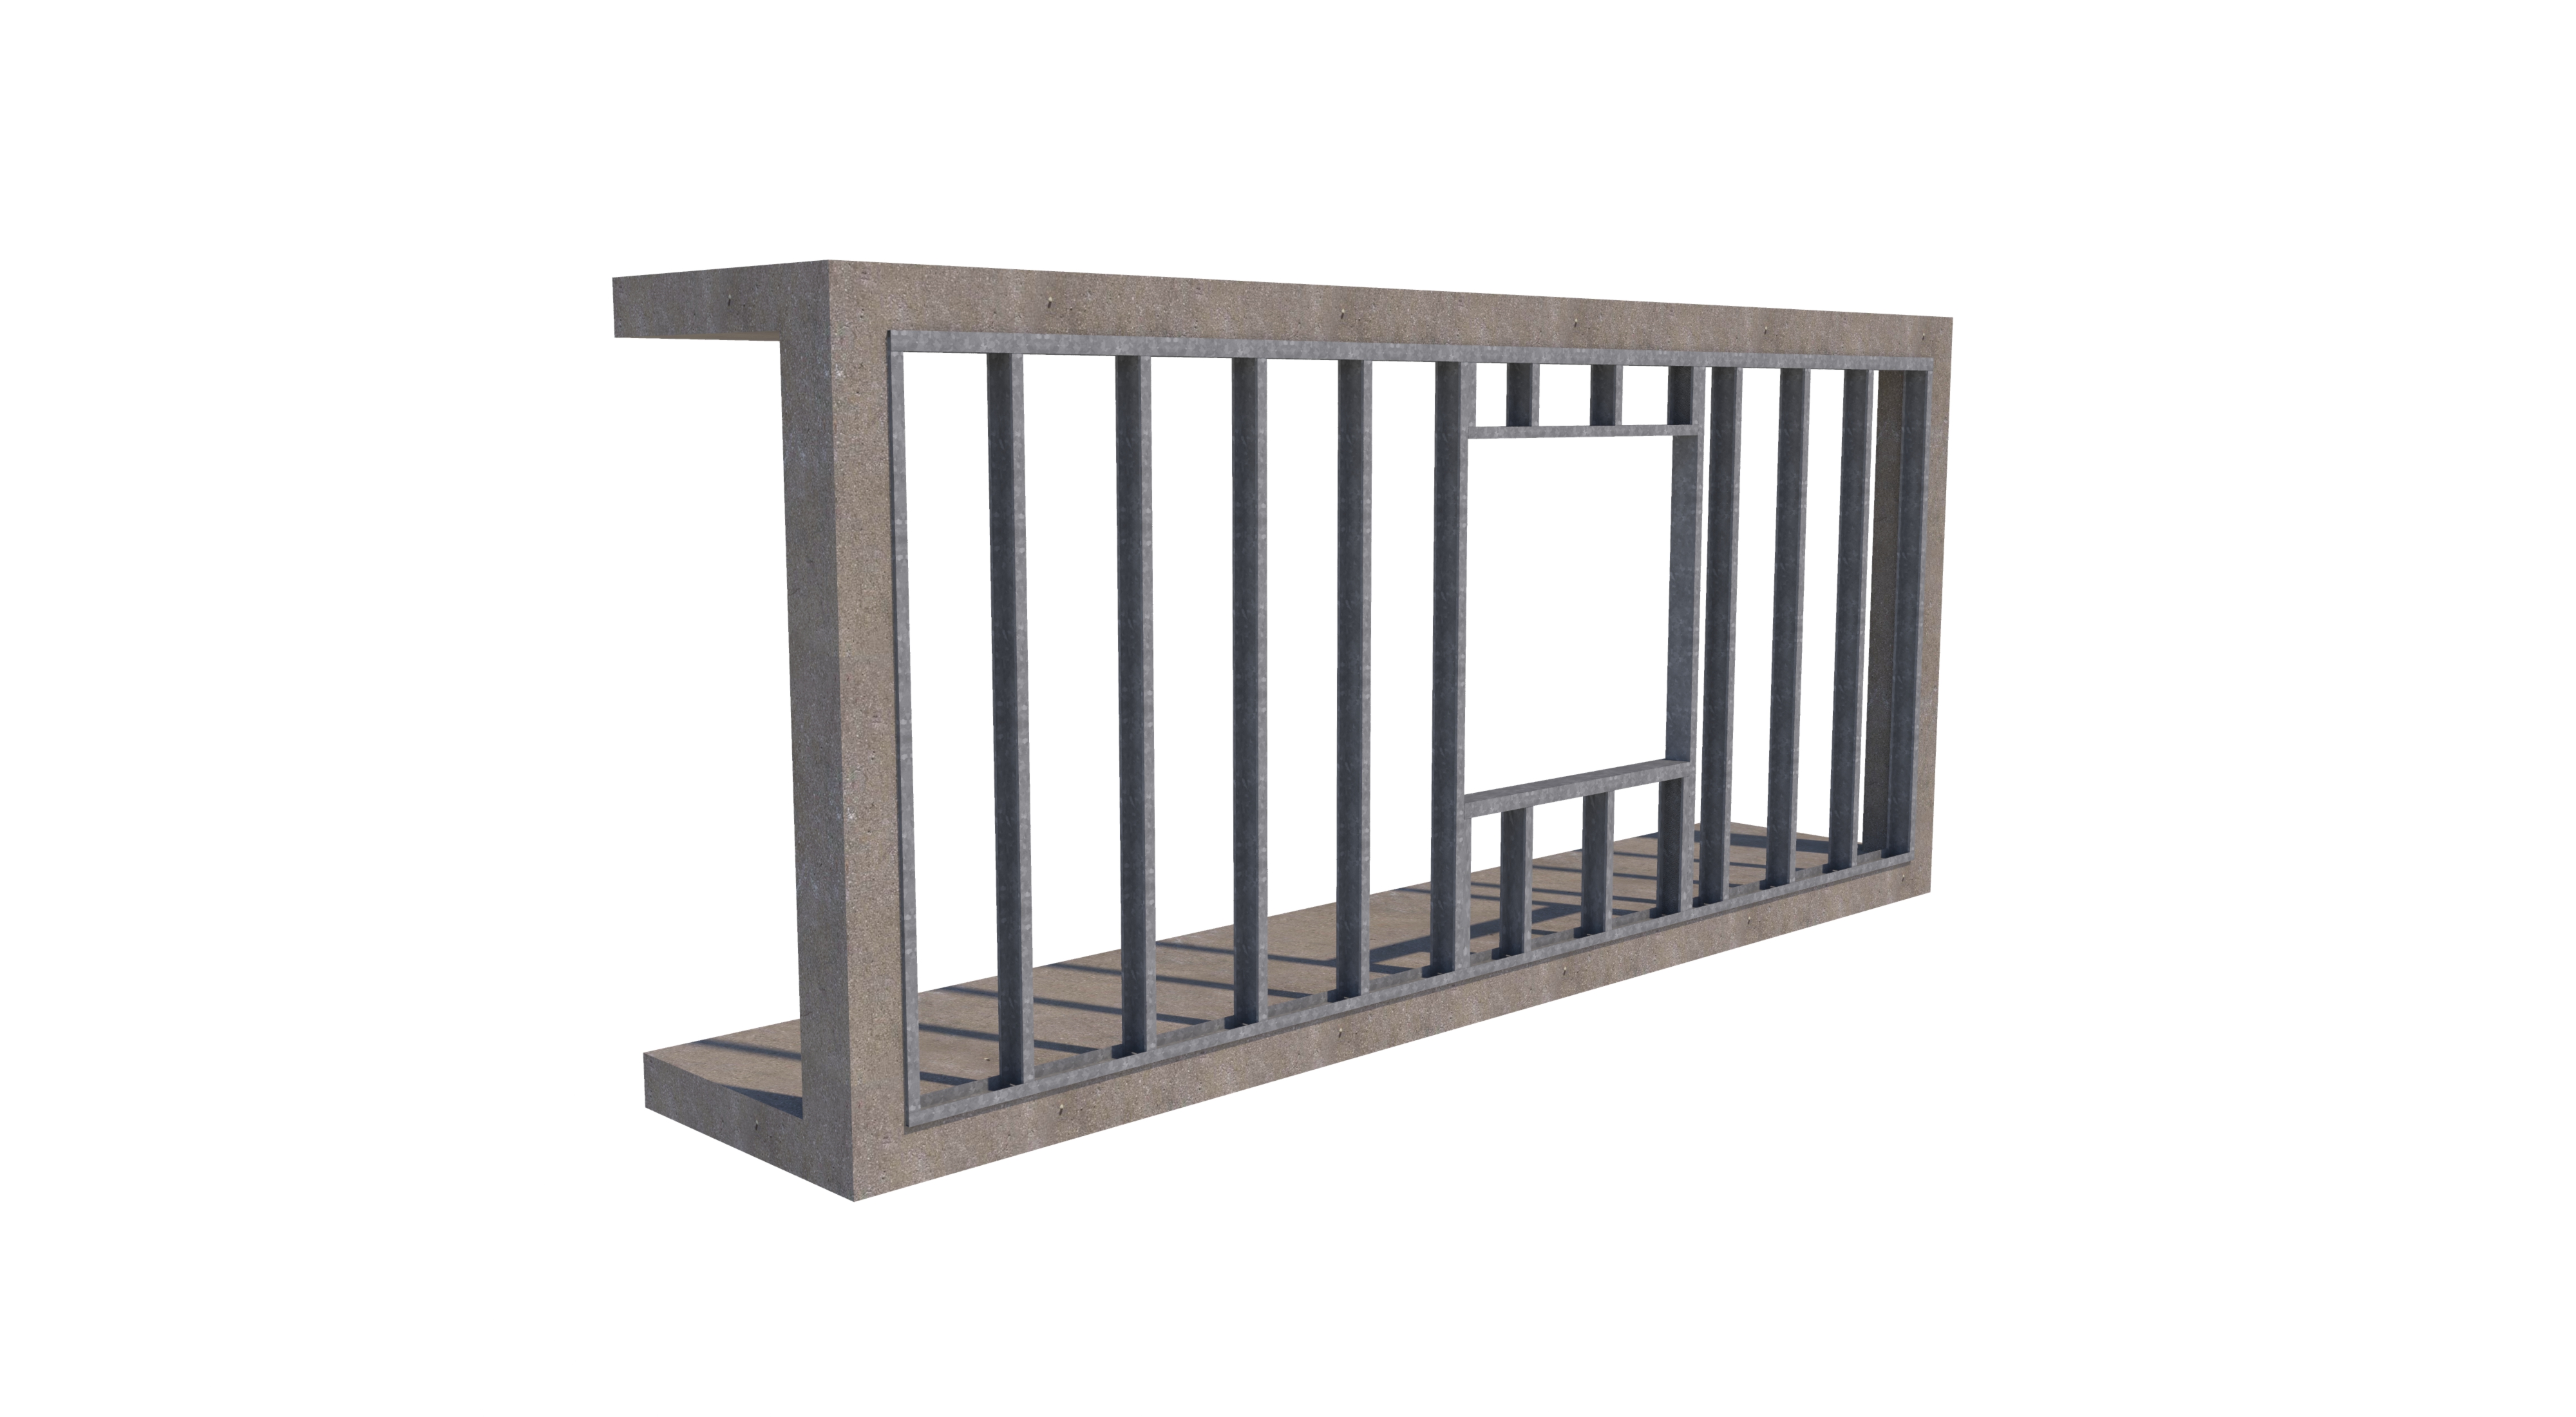 Steel framing systems